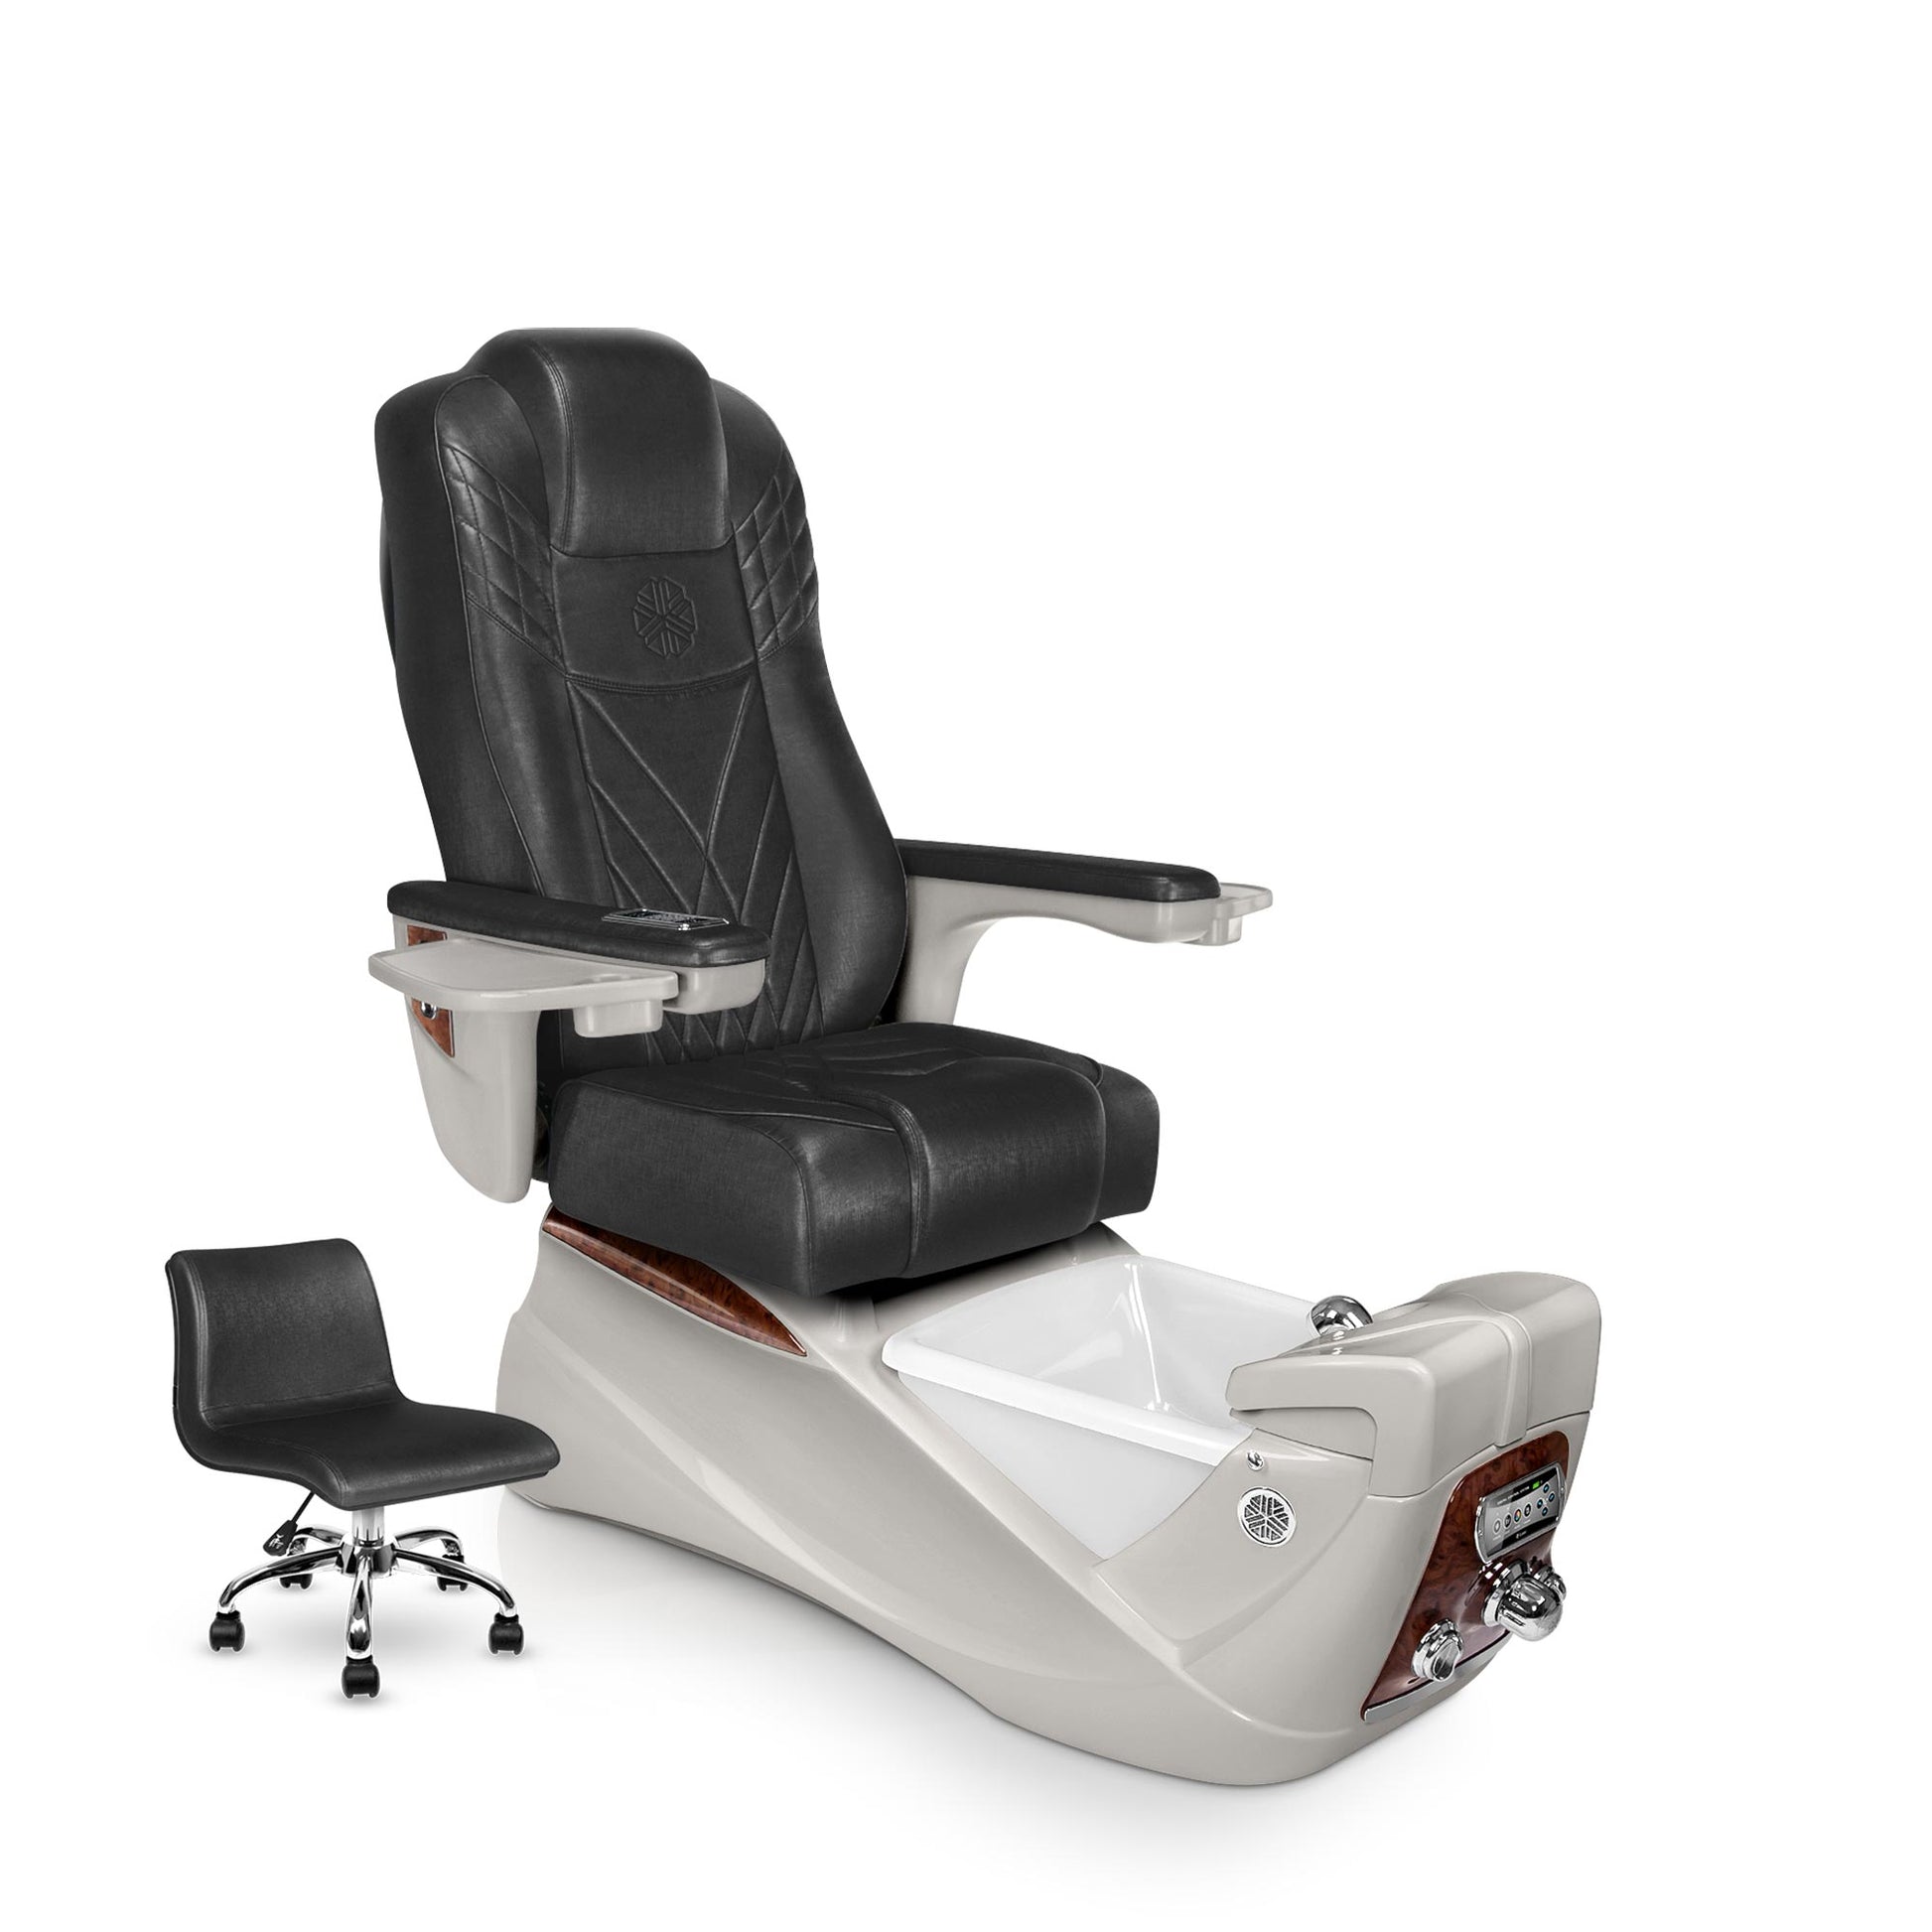 Lexor INFINITY pedicure chair with noir cushion and sandstone spa base